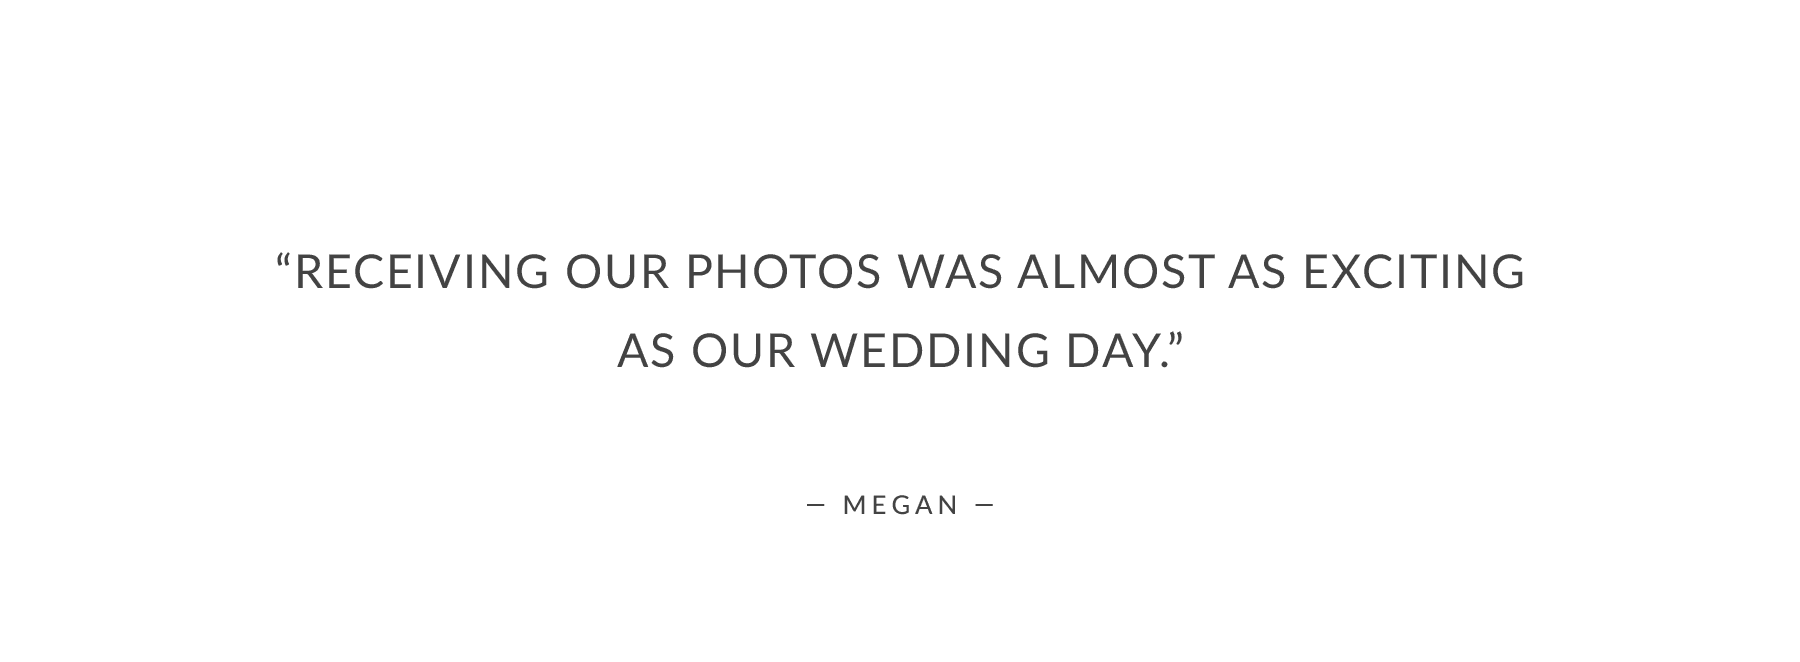 “Receiving our photos was almost as exciting as our wedding day.”